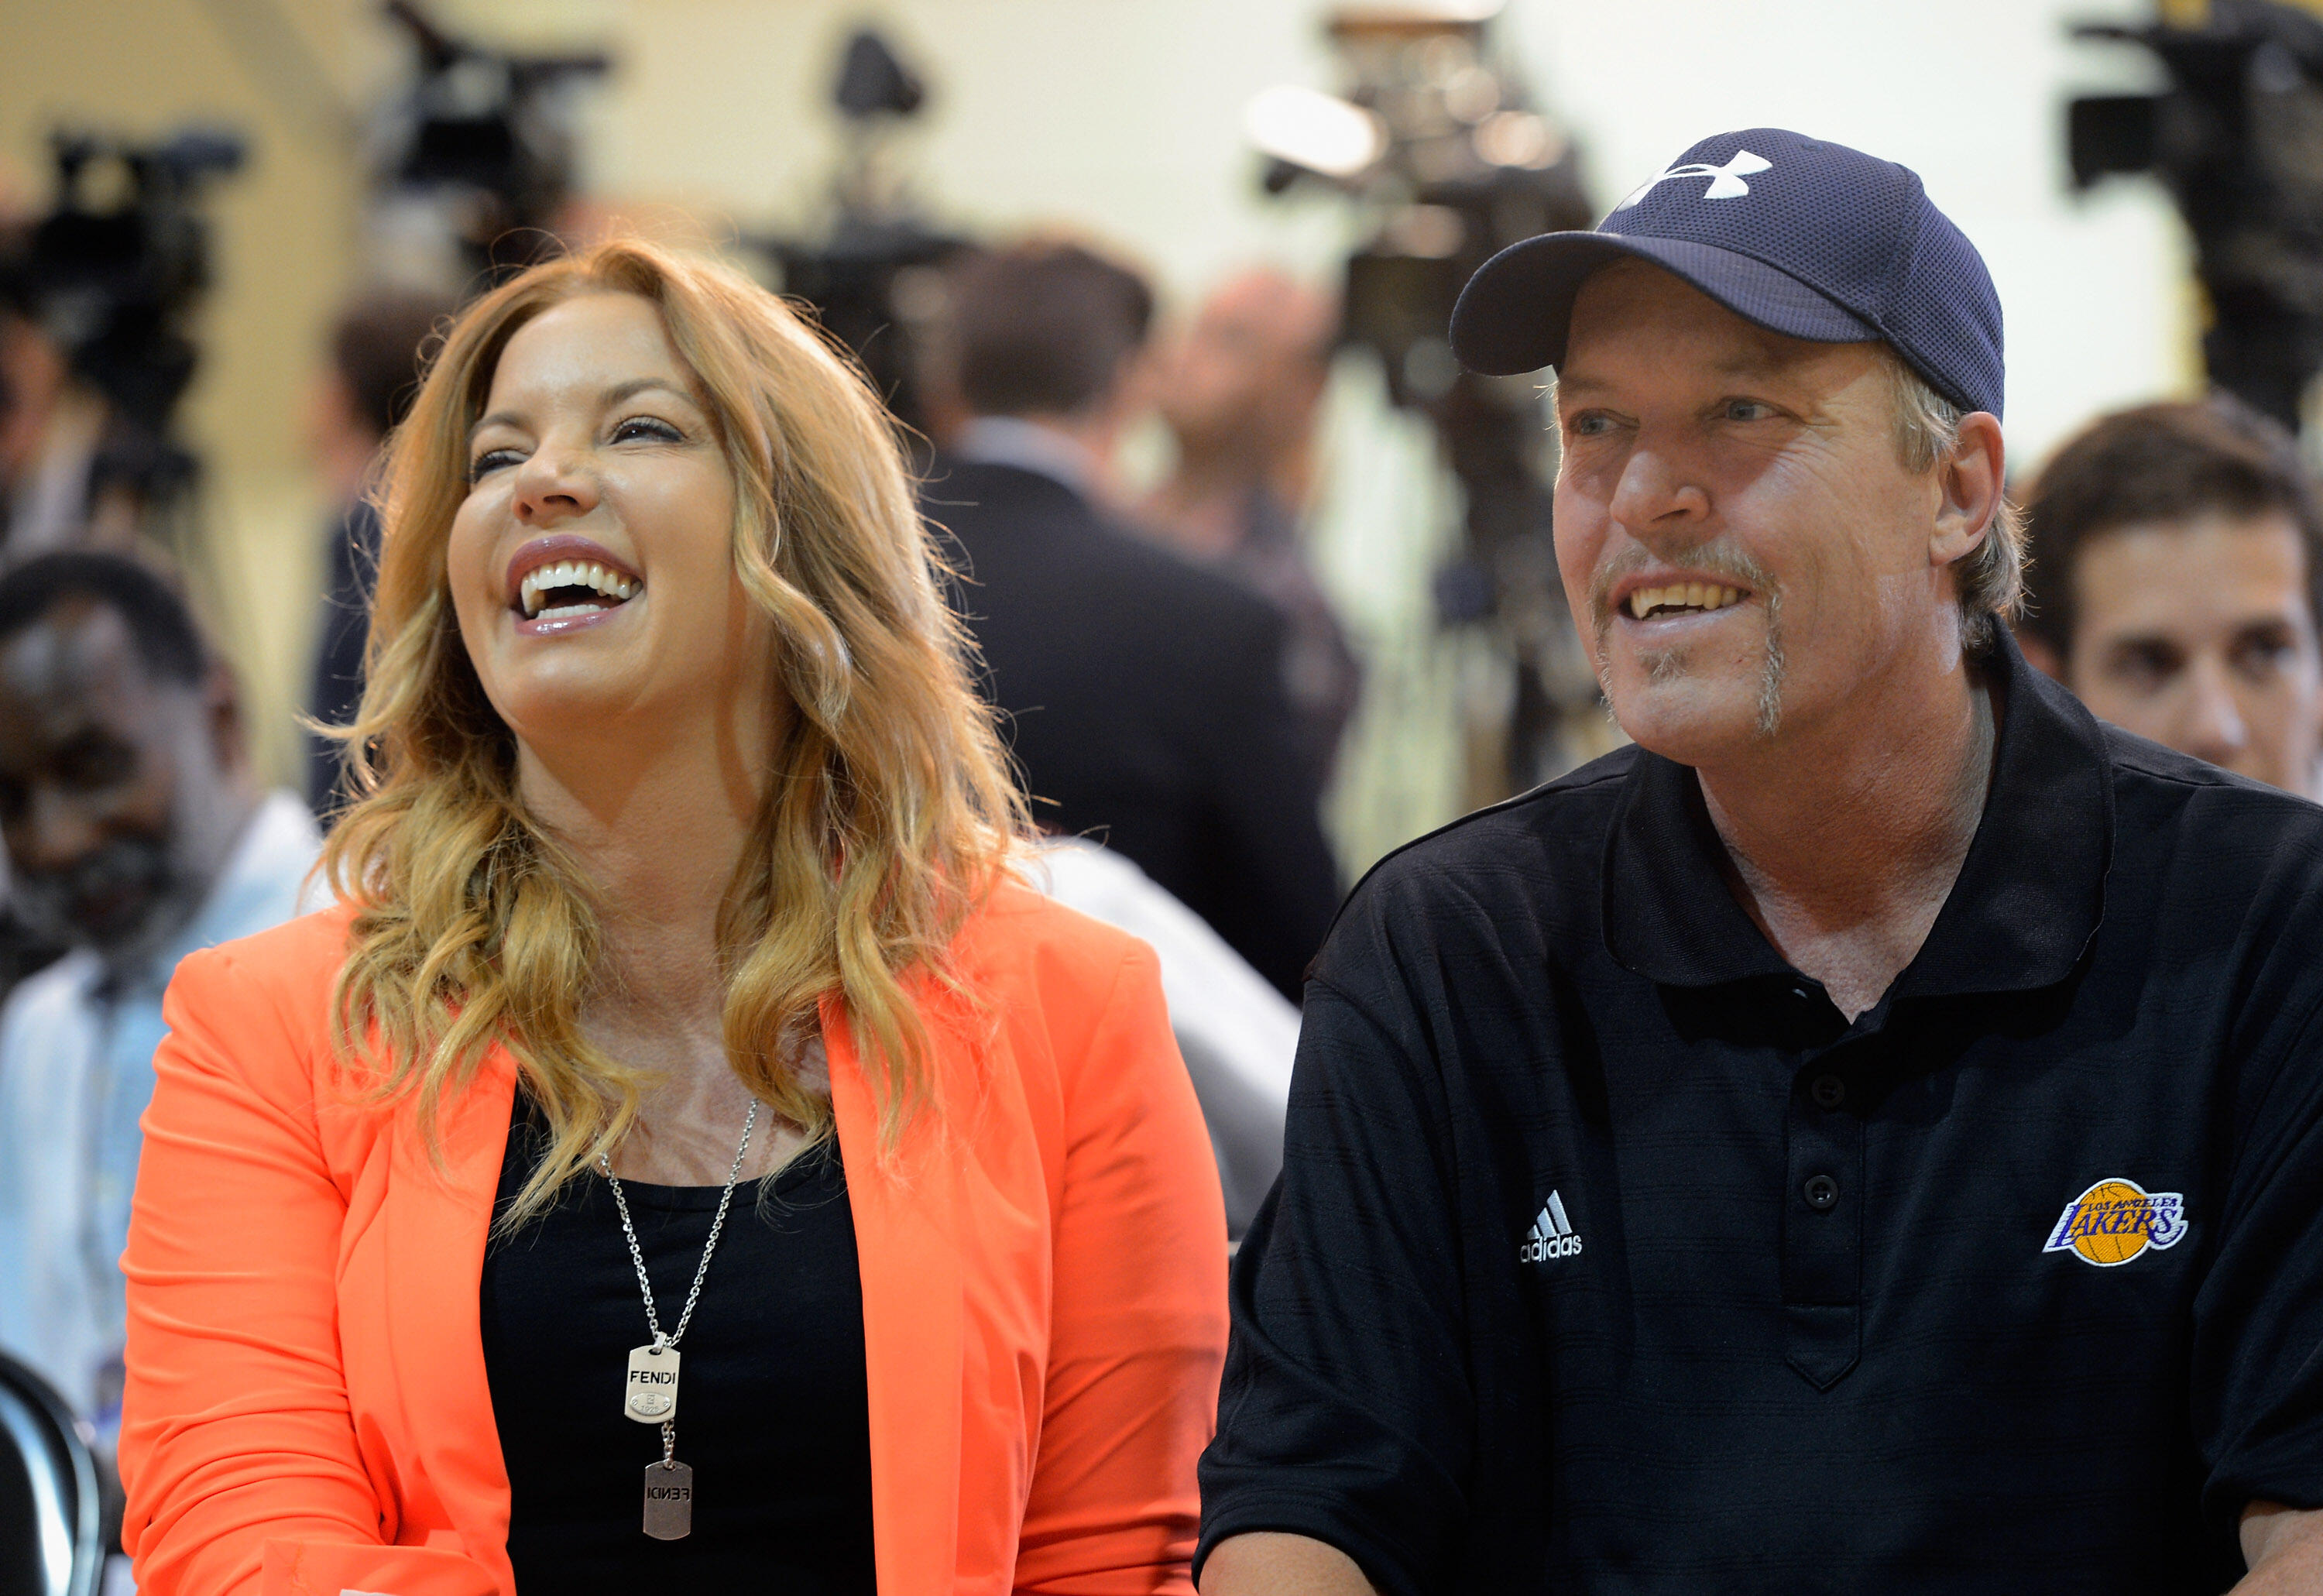 EL SEGUNDO, CA - AUGUST 10:  Jim Buss and his sister Jeanie Buss of the Los Angeles lakers attend a news conference where Dwight Howard was introduced as the newest member of the team at the Toyota Sports Center on August 10, 2012 in El Segundo, Californi